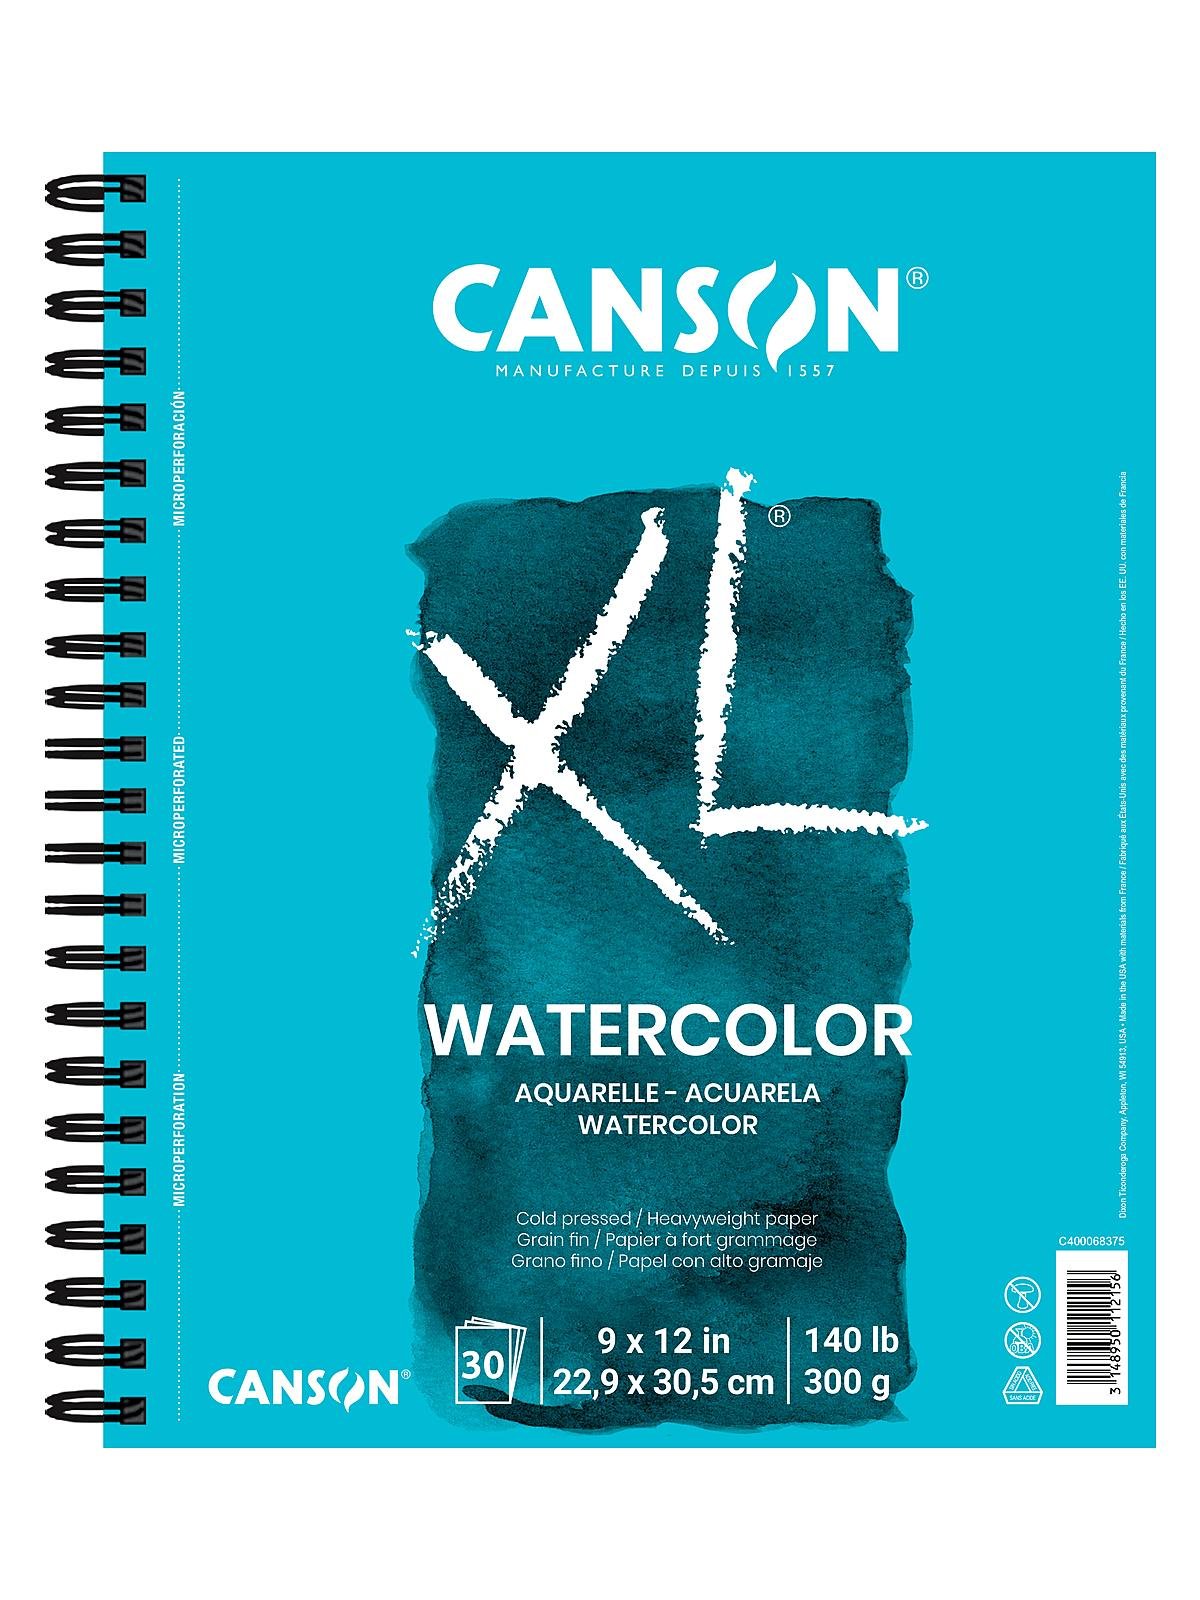 Canson Sidewire XL Series Watercolor Pad